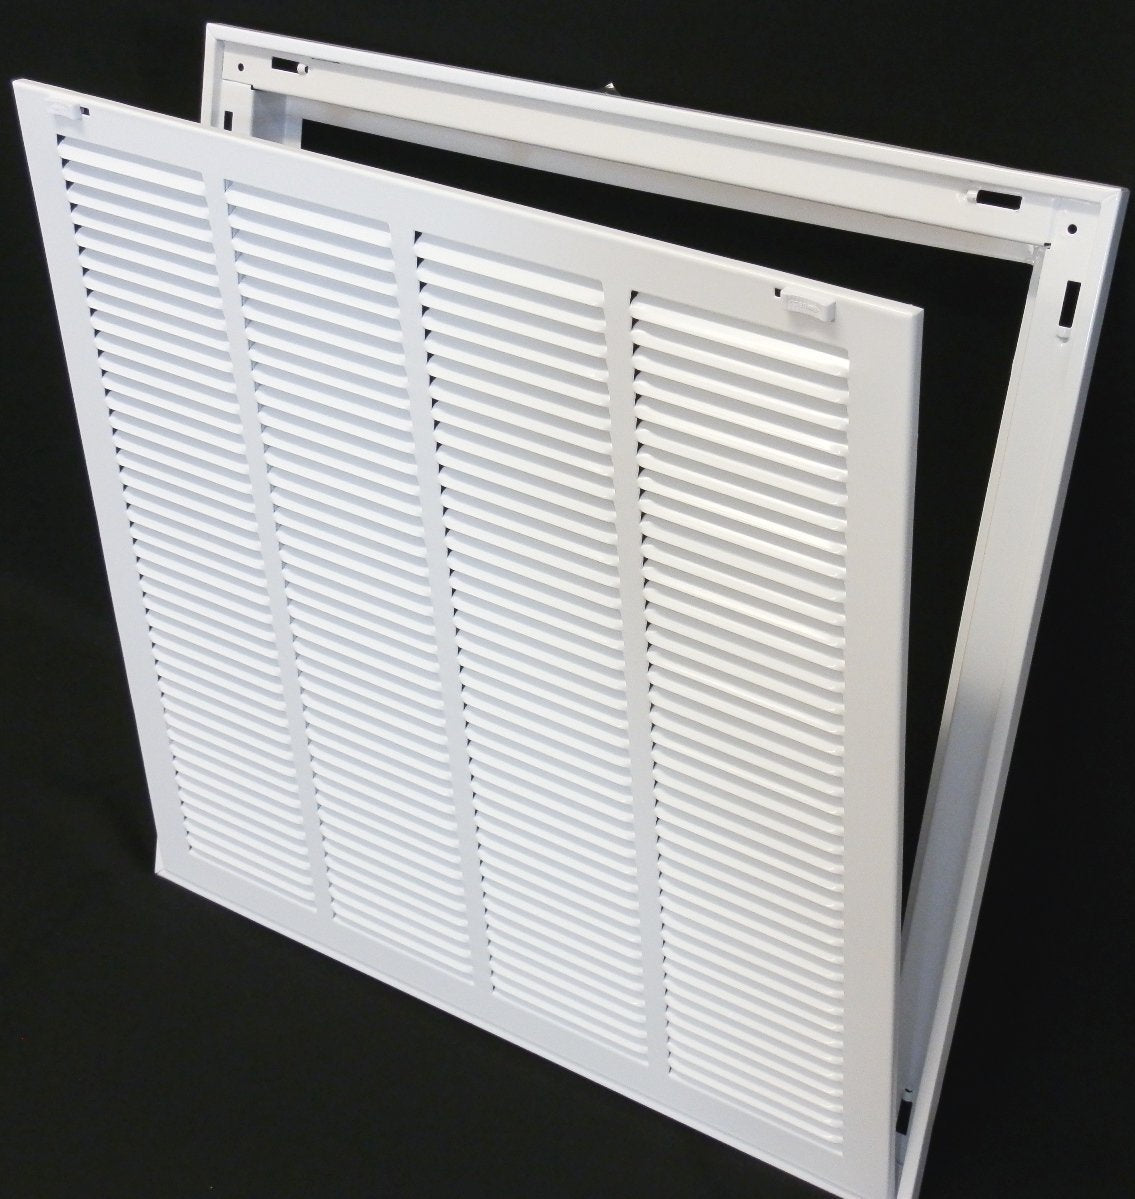 25&quot; X 18&quot; Steel Return Air Filter Grille for 1&quot; Filter - Removable Frame - [Outer Dimensions: 27 5/8&quot; X 20 5/8&quot;]